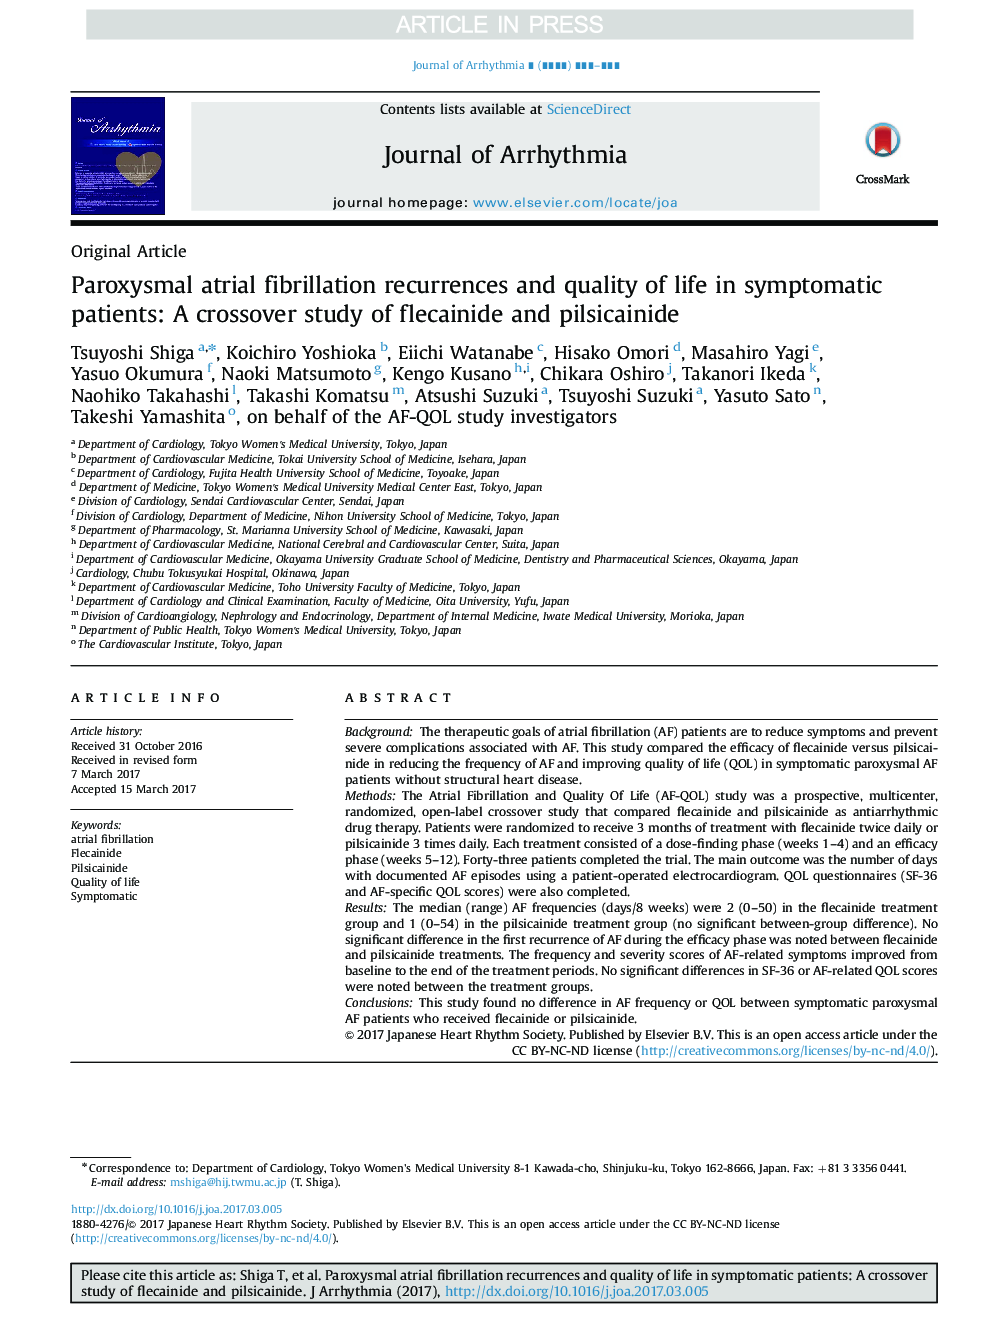 Paroxysmal atrial fibrillation recurrences and quality of life in symptomatic patients: A crossover study of flecainide and pilsicainide